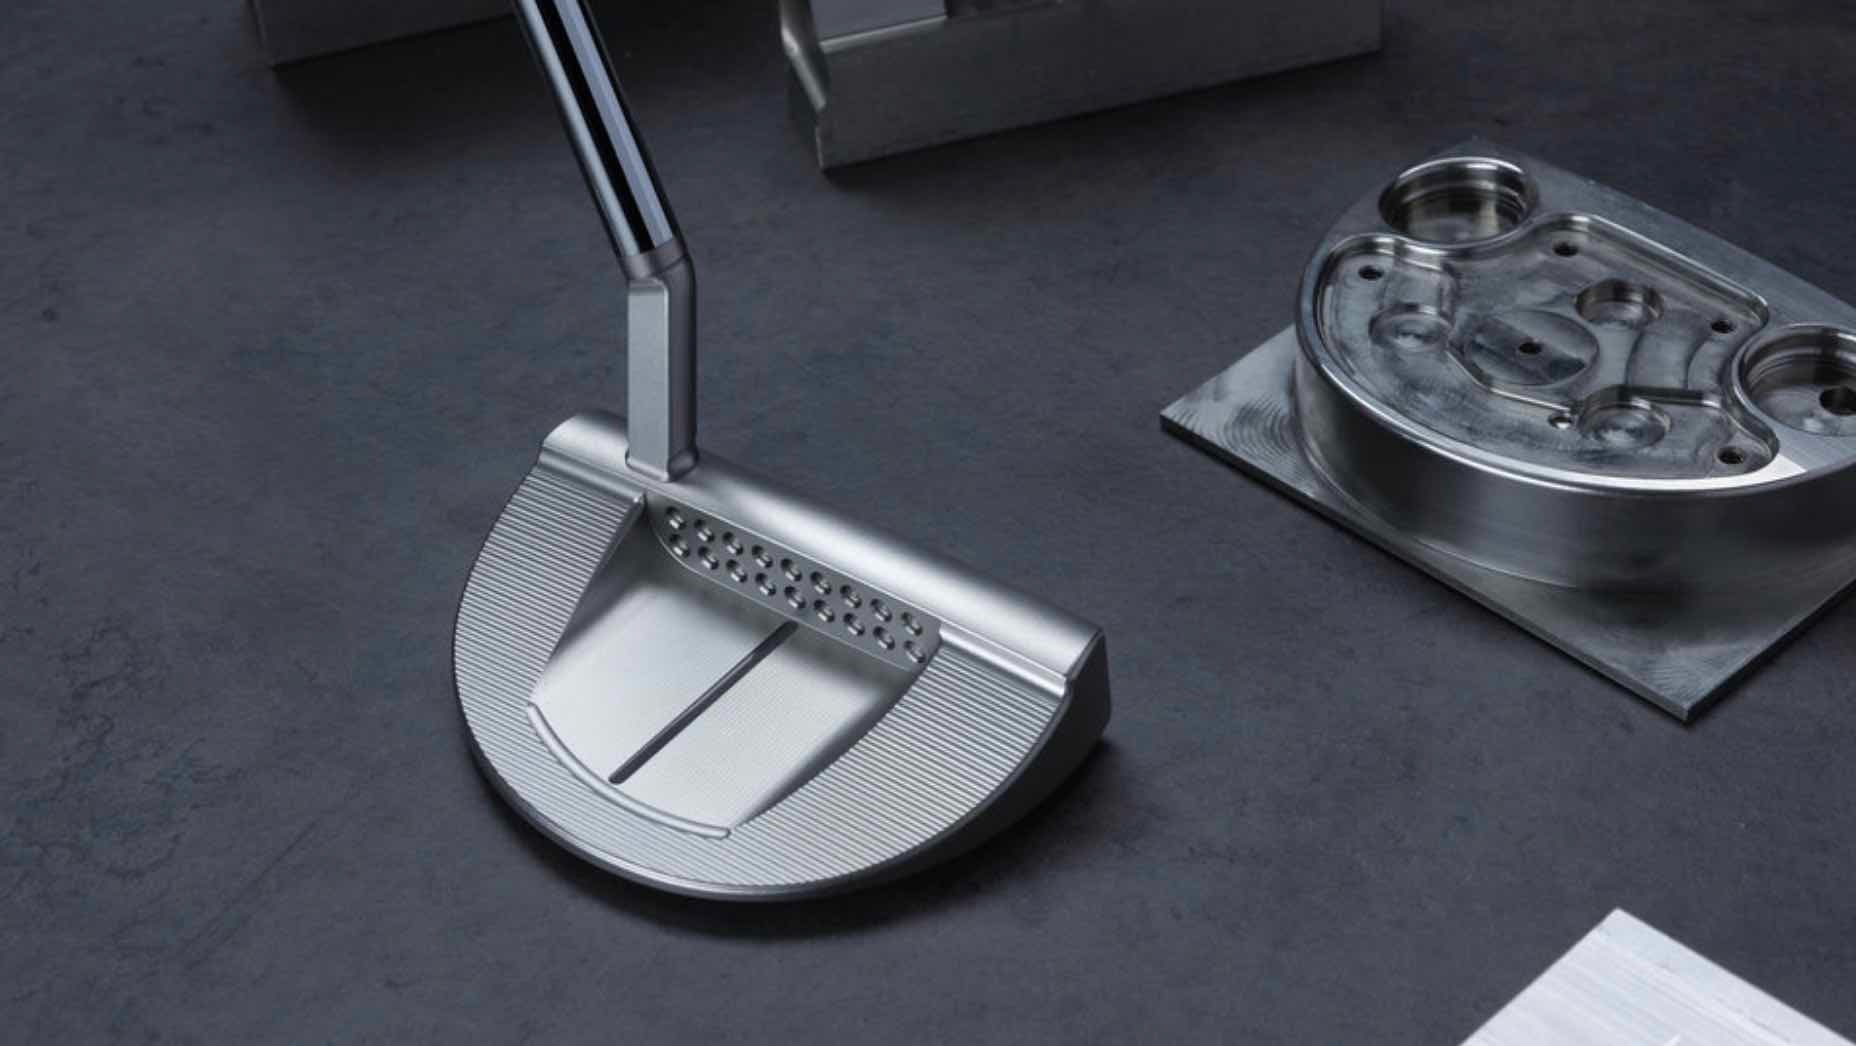 Scotty Cameron unveils new limited-release Monoblok 6 and 6.5 mallets